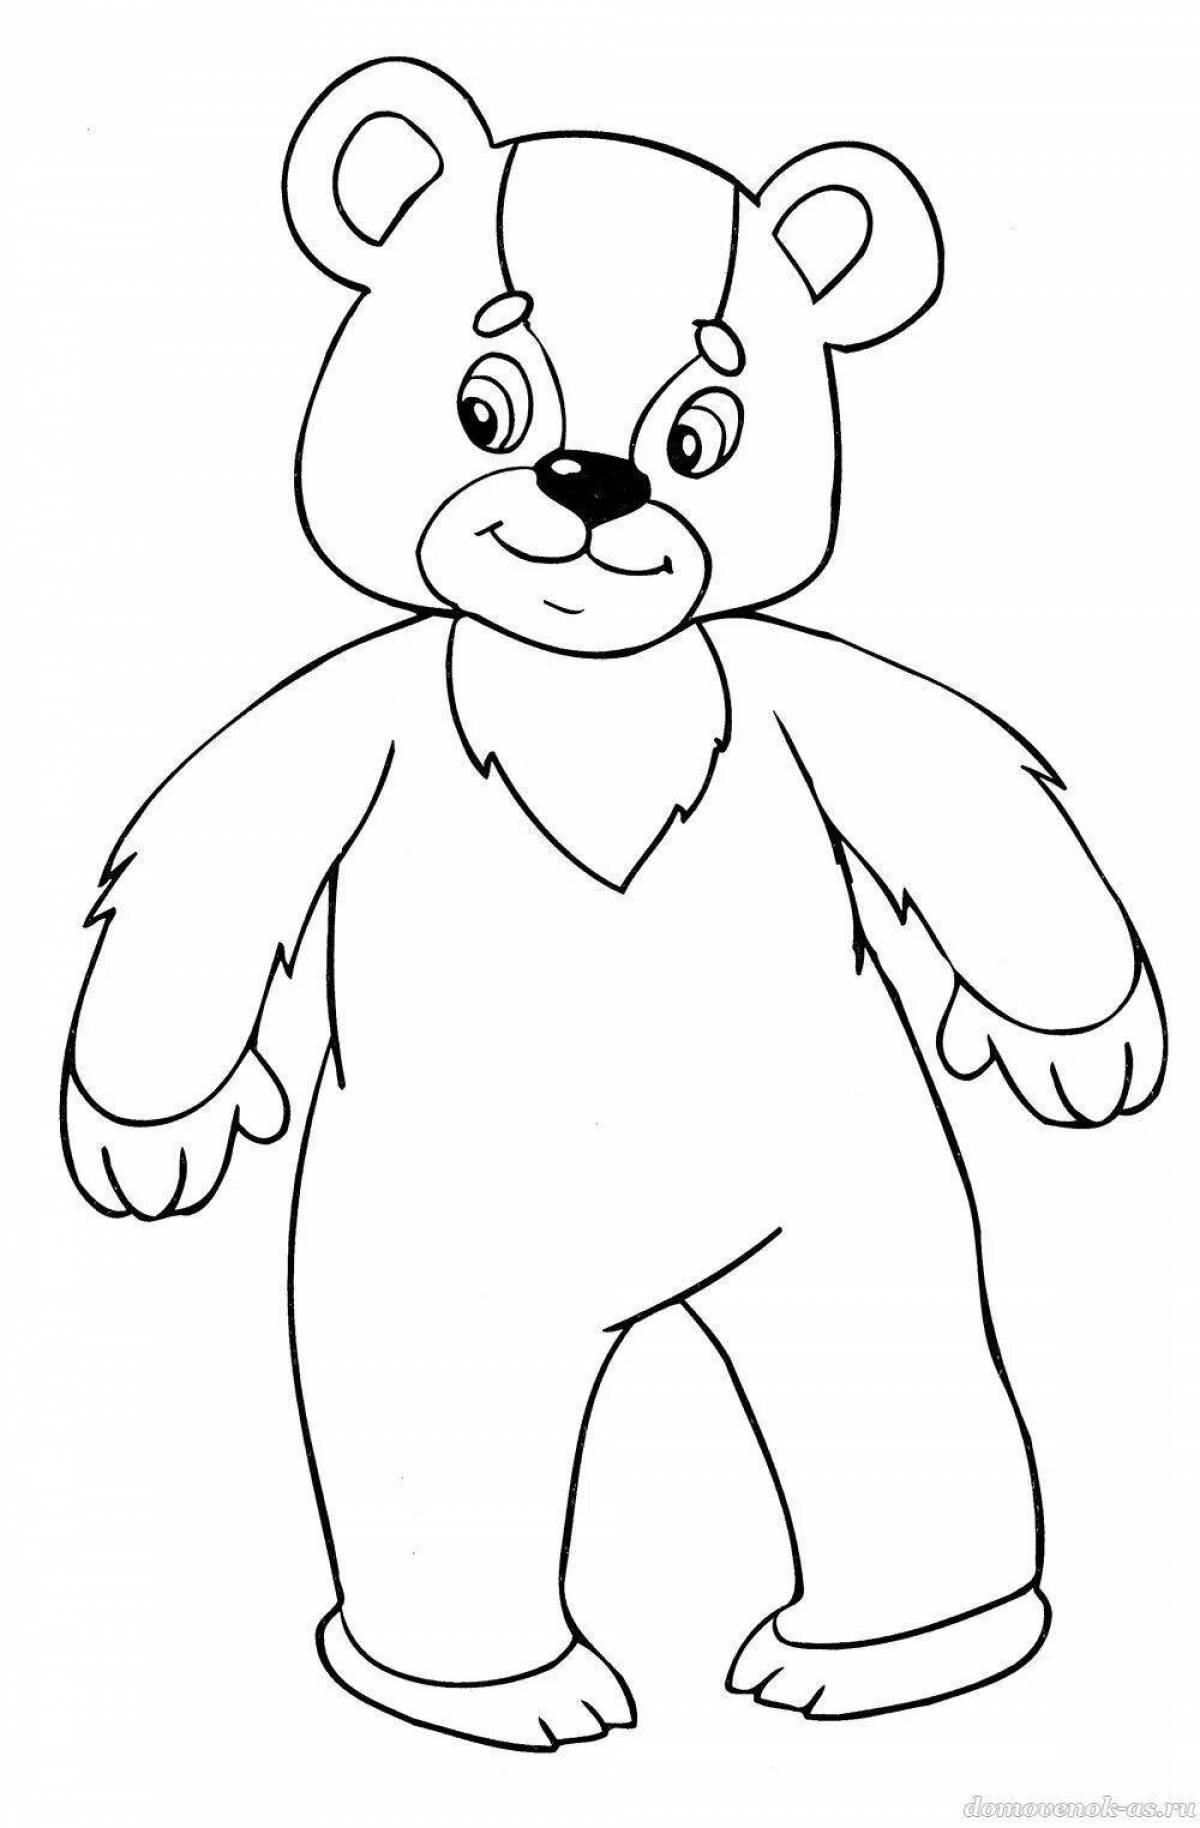 Snug coloring page clumsy bear